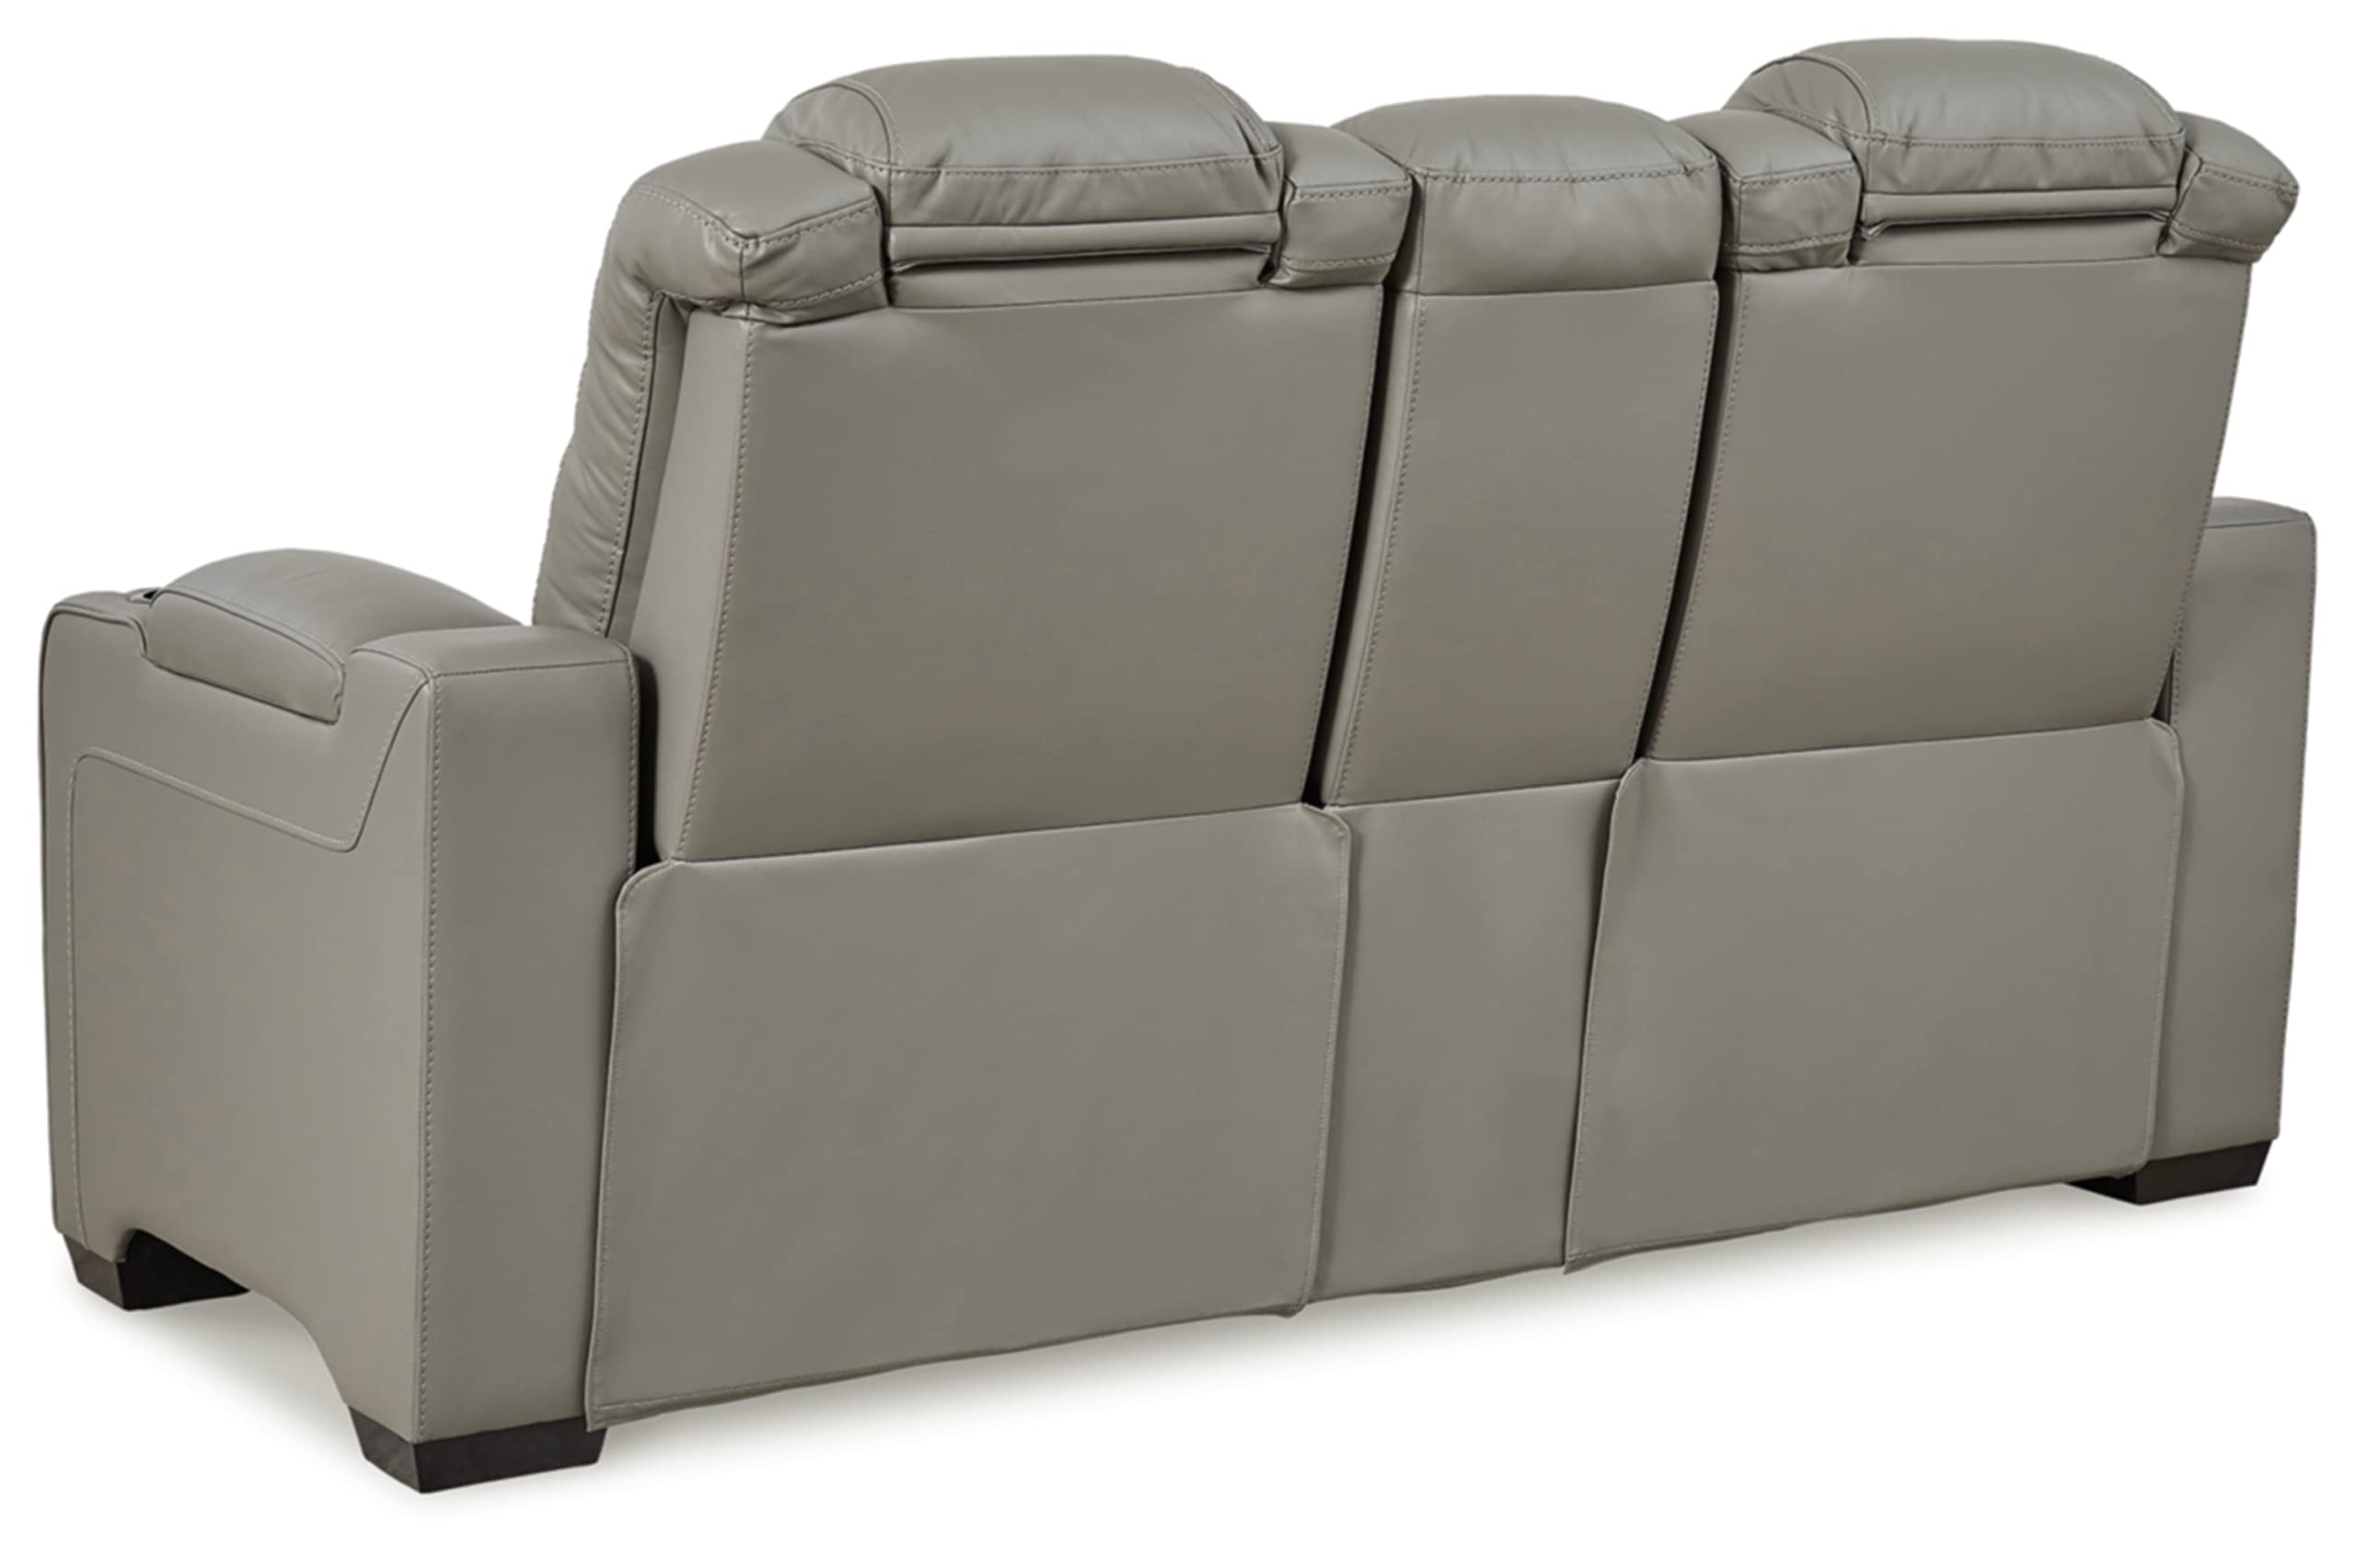 Signature Design by Ashley Backtrack Contemporary Tufted Leather Power Reclining Loveseat with Console and Adjustable Headrest, Light Gray